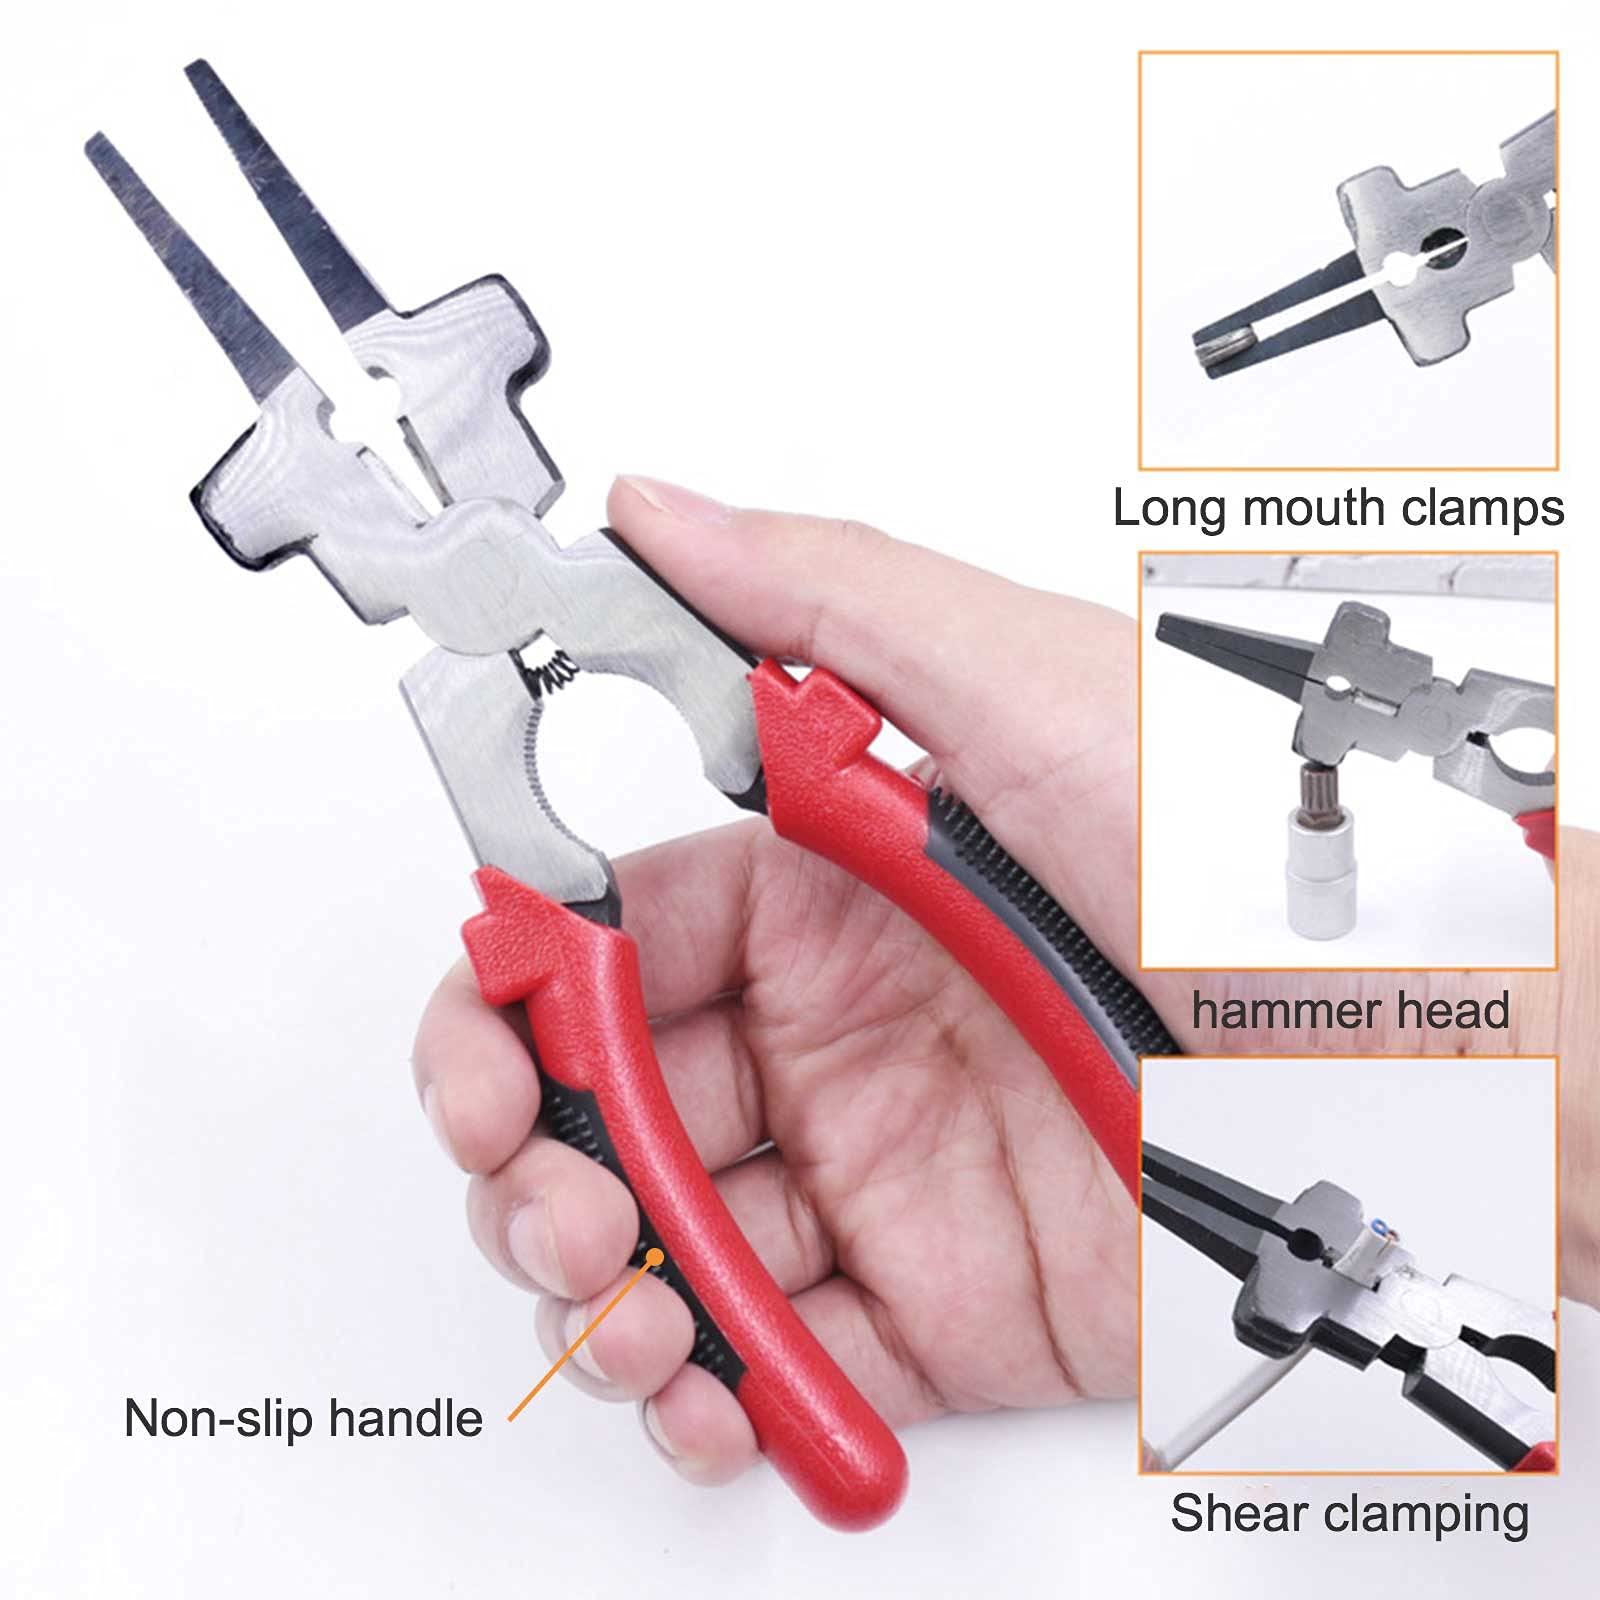 Handook Welding Pliers, 8 Inch Inch Anti-Rust MIG Welding Pliers for Professional Welding - Reliable and Durable